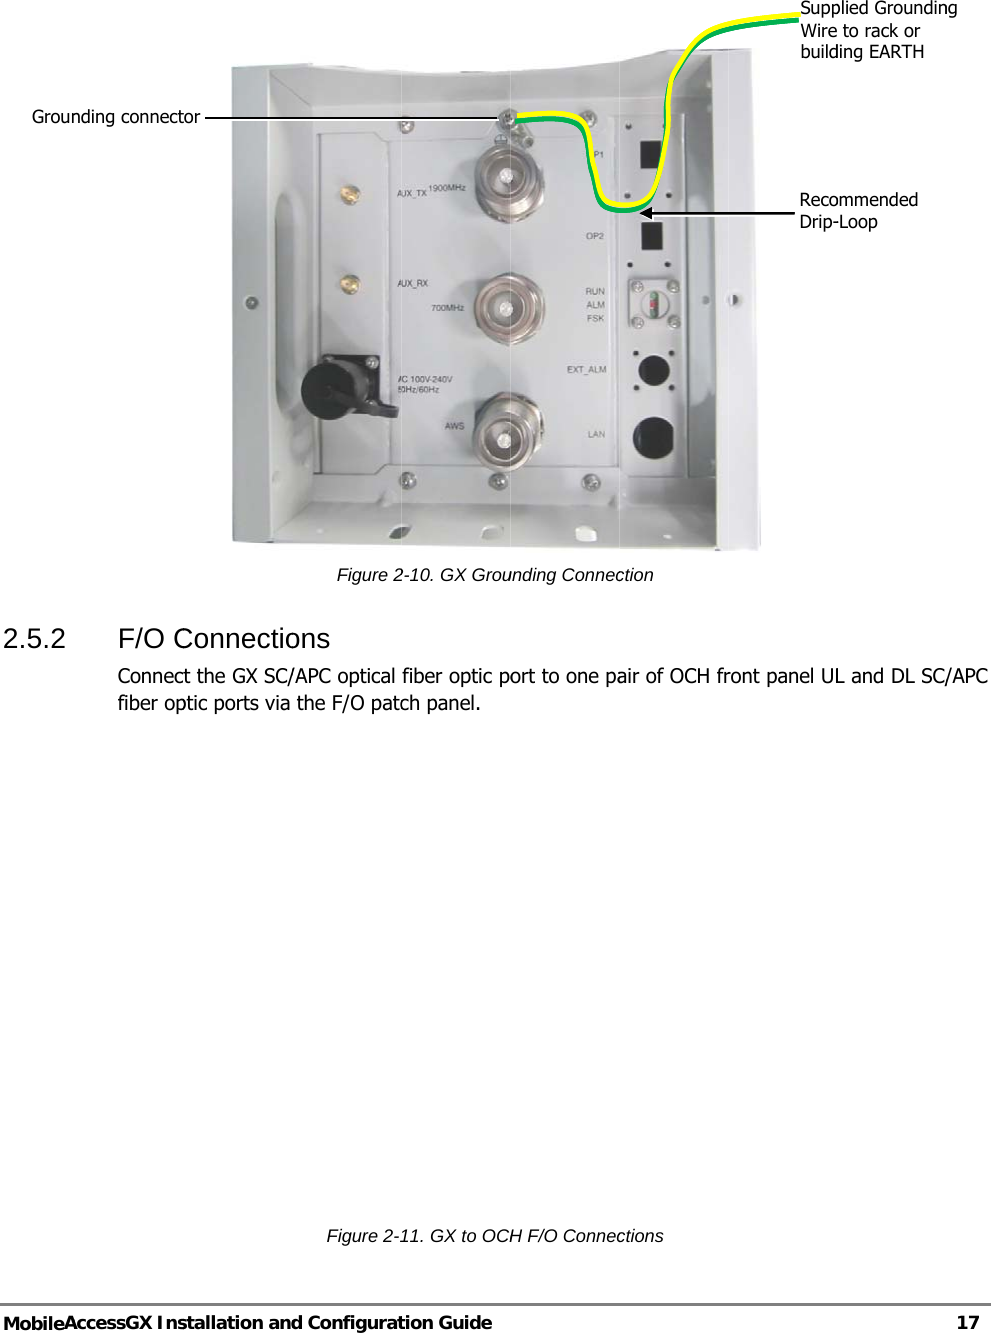   MobileA2.5.2 GrounAccessGX Ins F/O CConnectfiber opnding connectstallation andConnectiot the GX SC/ptic ports via or d ConfiguratFigure 2ons /APC optical the F/O patcFigure 2-tion Guide 2-10. GX Groufiber optic poch panel. 11. GX to OCHunding Connecort to one paH F/O Connecction air of OCH frctions  ront panel ULSuppWire buildRecoDrip-L and DL SC/plied Groundinto rack or ding EARTH ommended -Loop 17 /APC  ng 